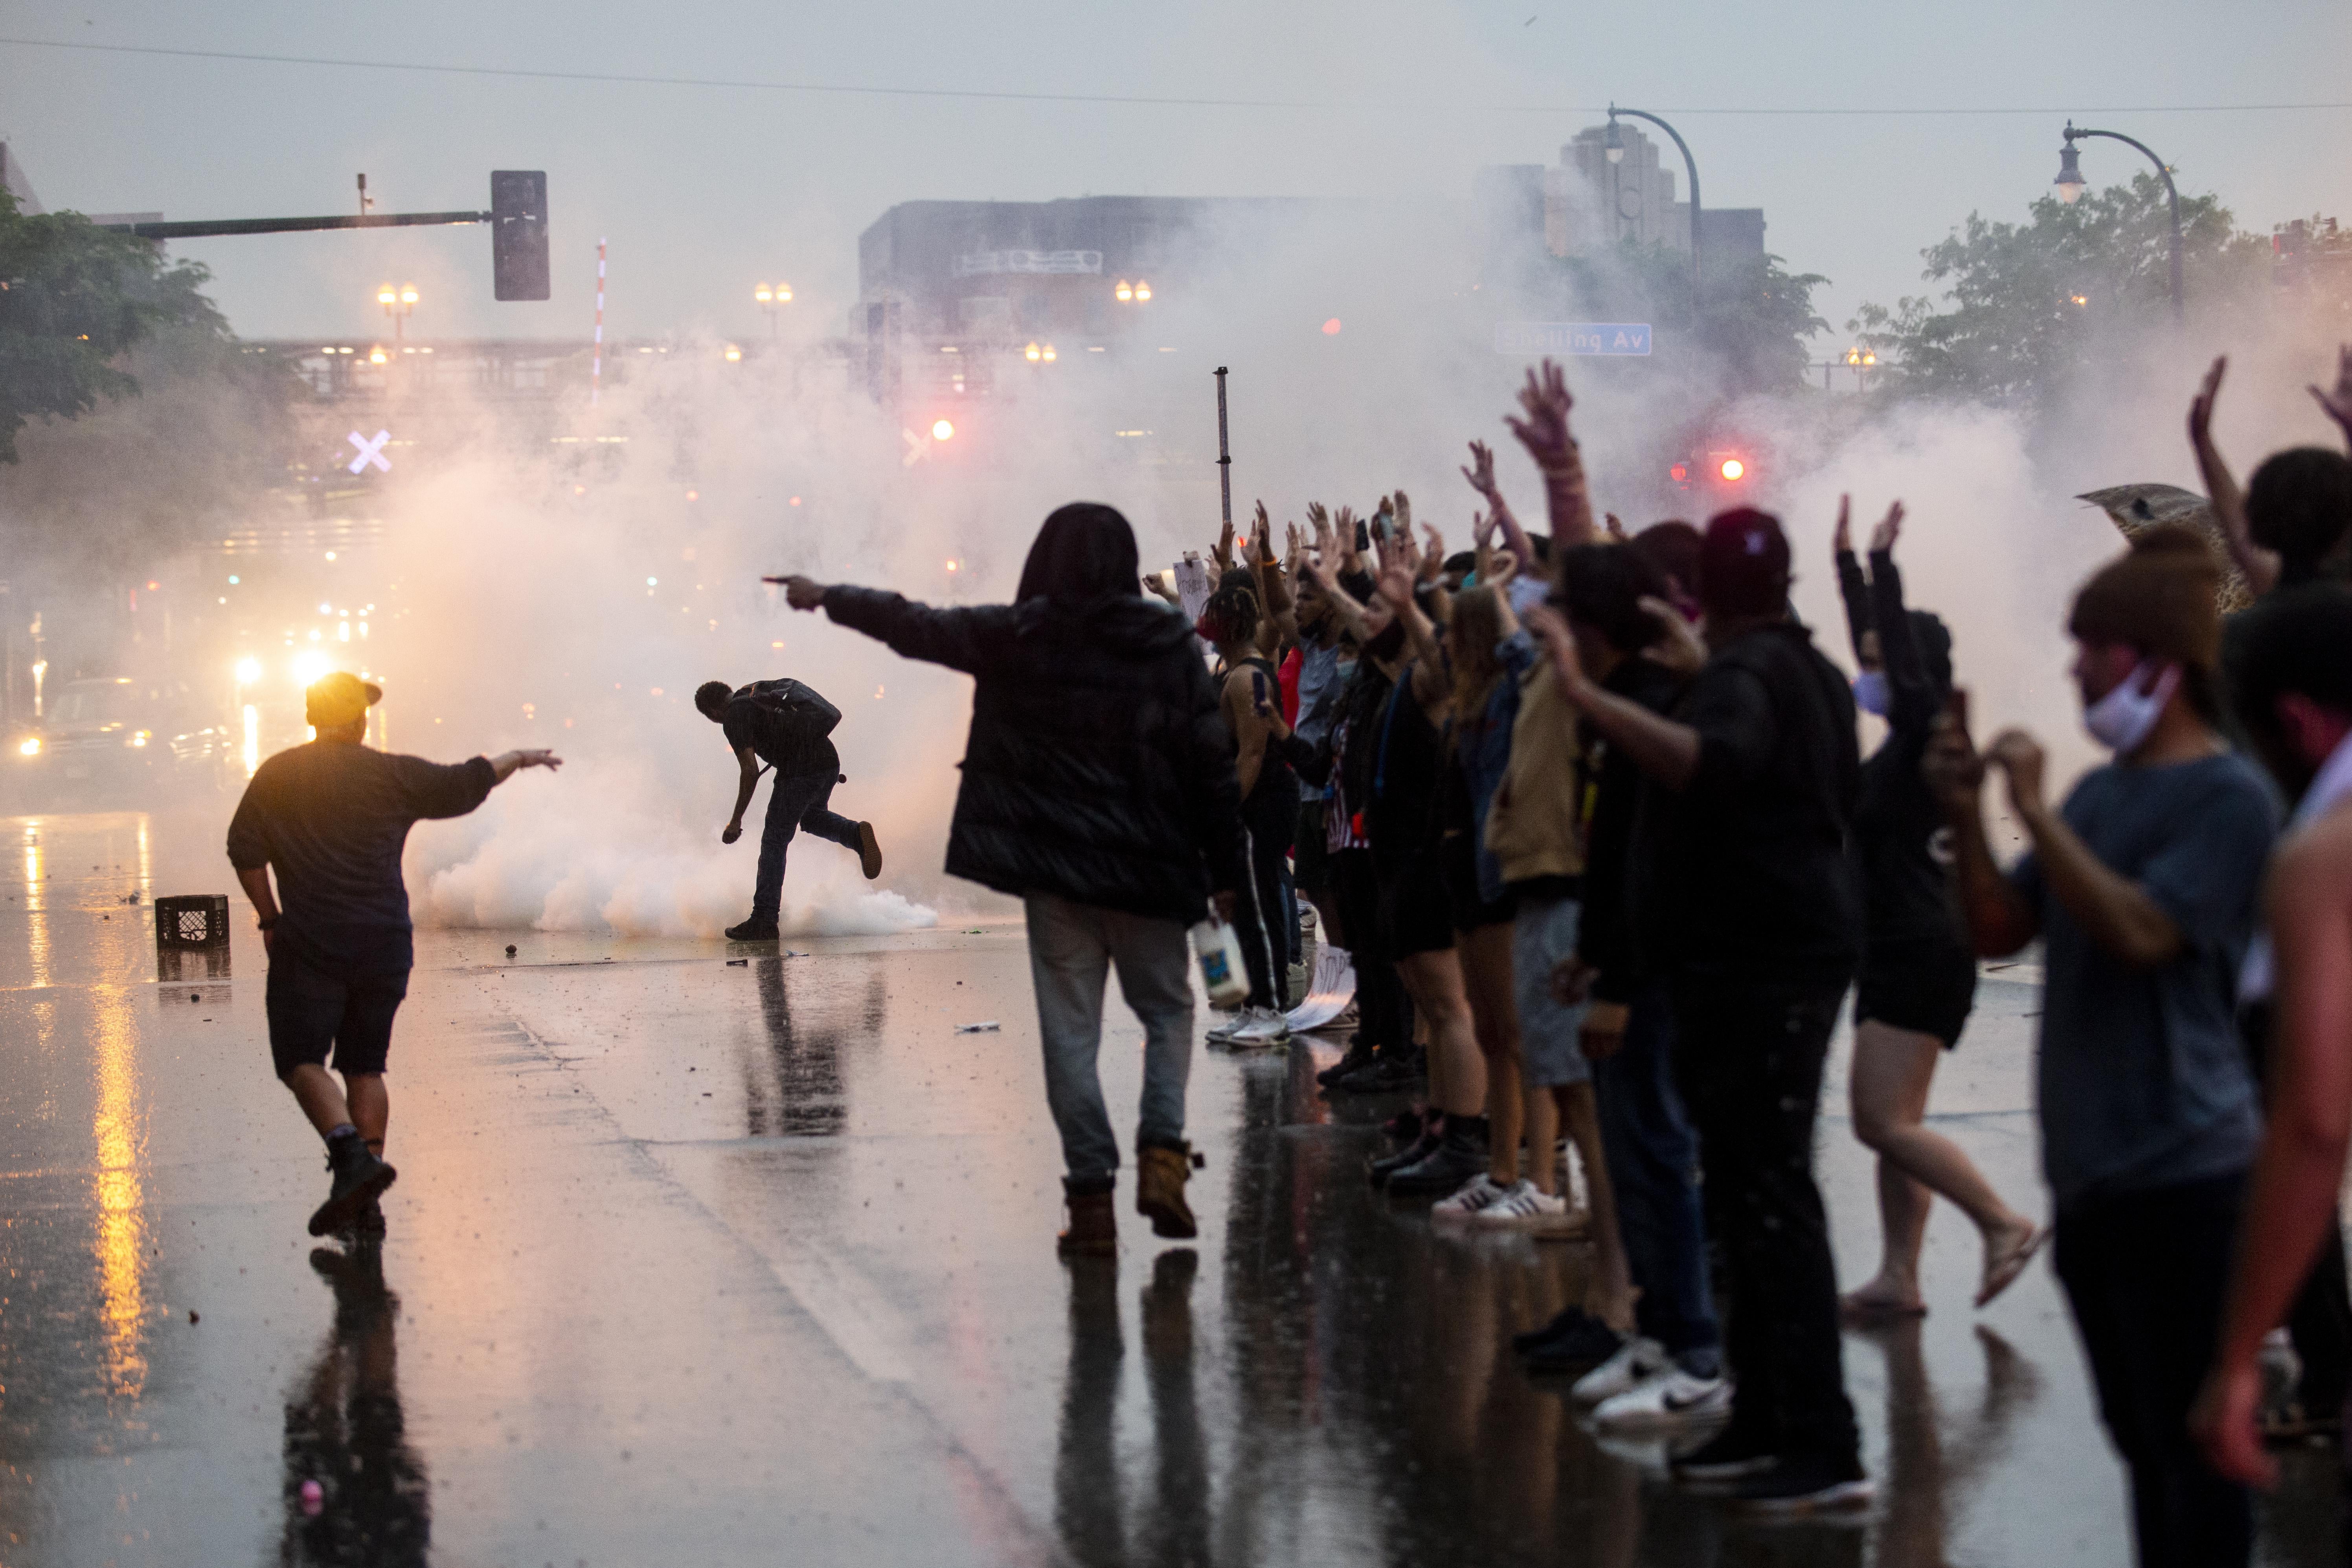 Protesters stand in a line in the street with their hands up as tear gas floods the scene.